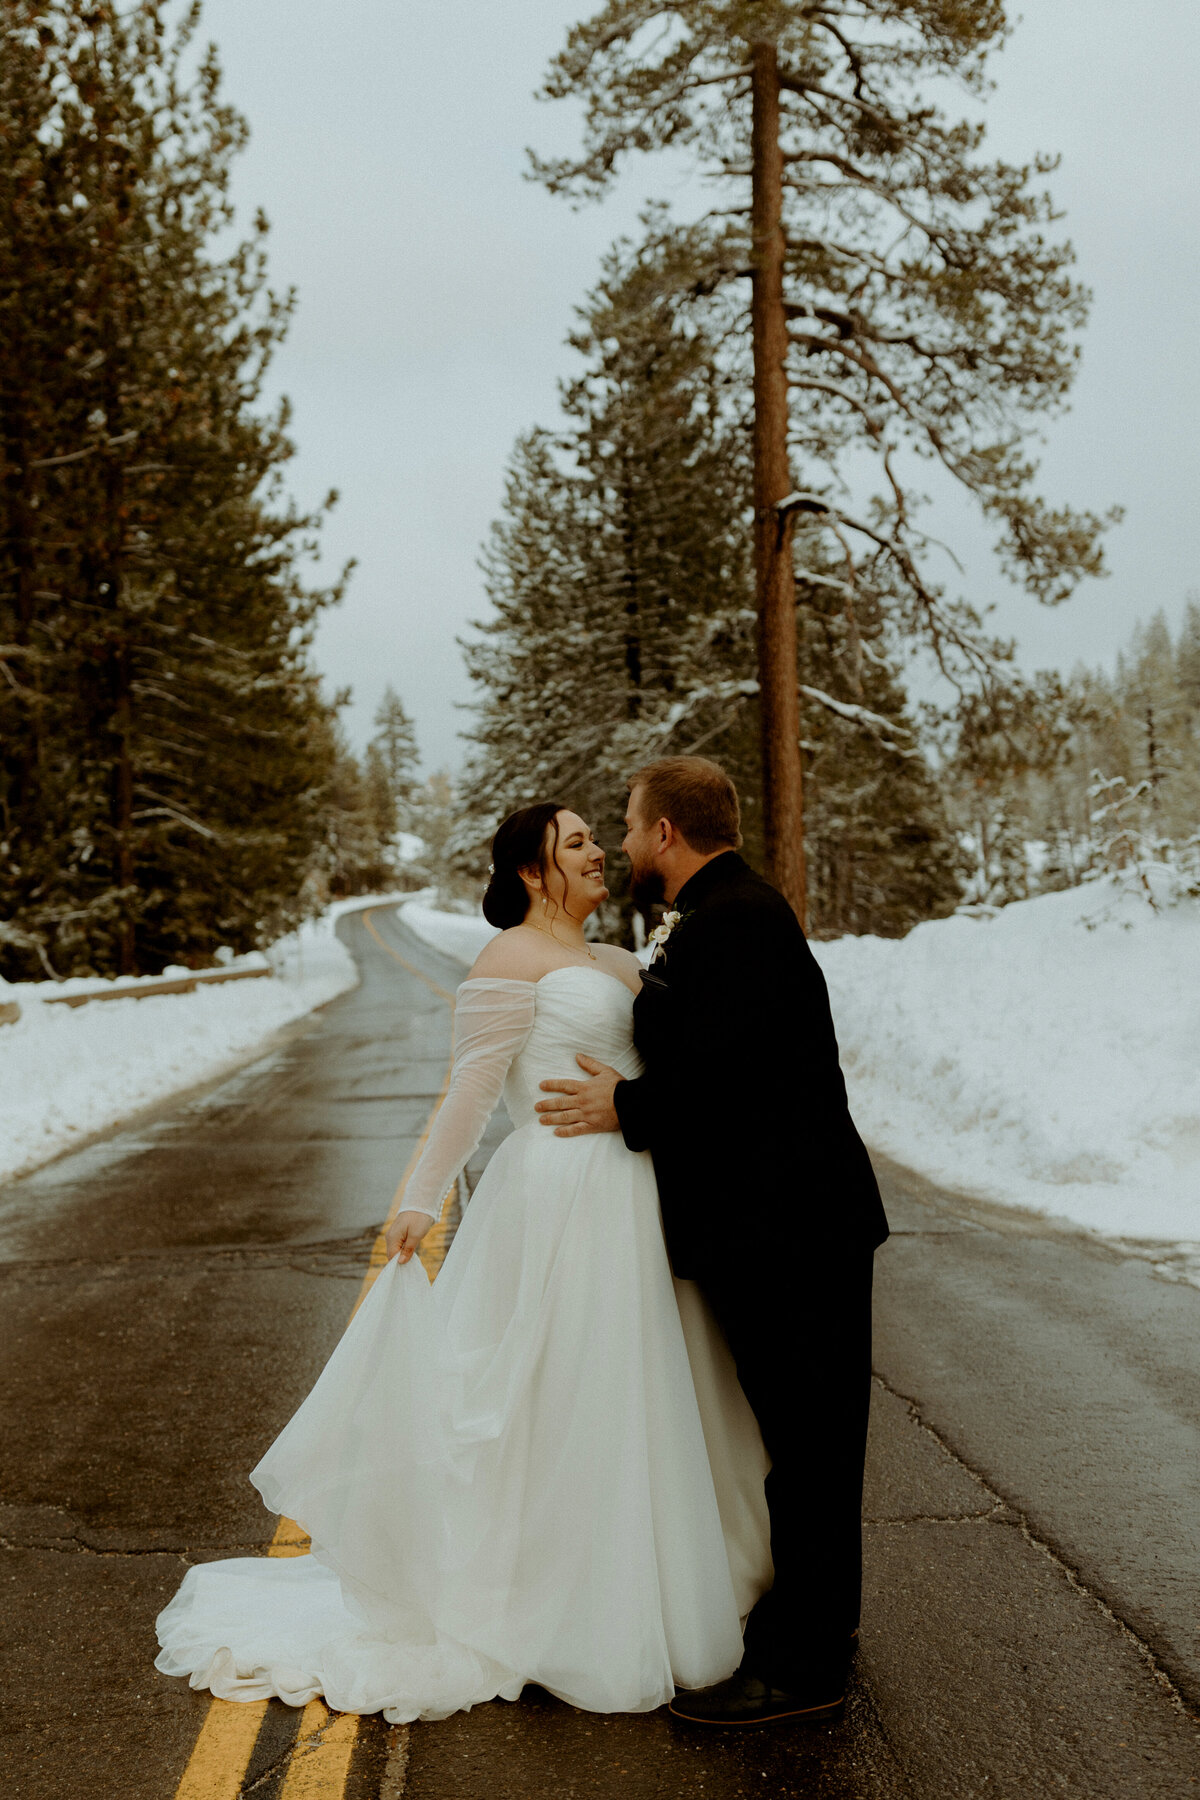 Bridal Alterations Client in snowy California